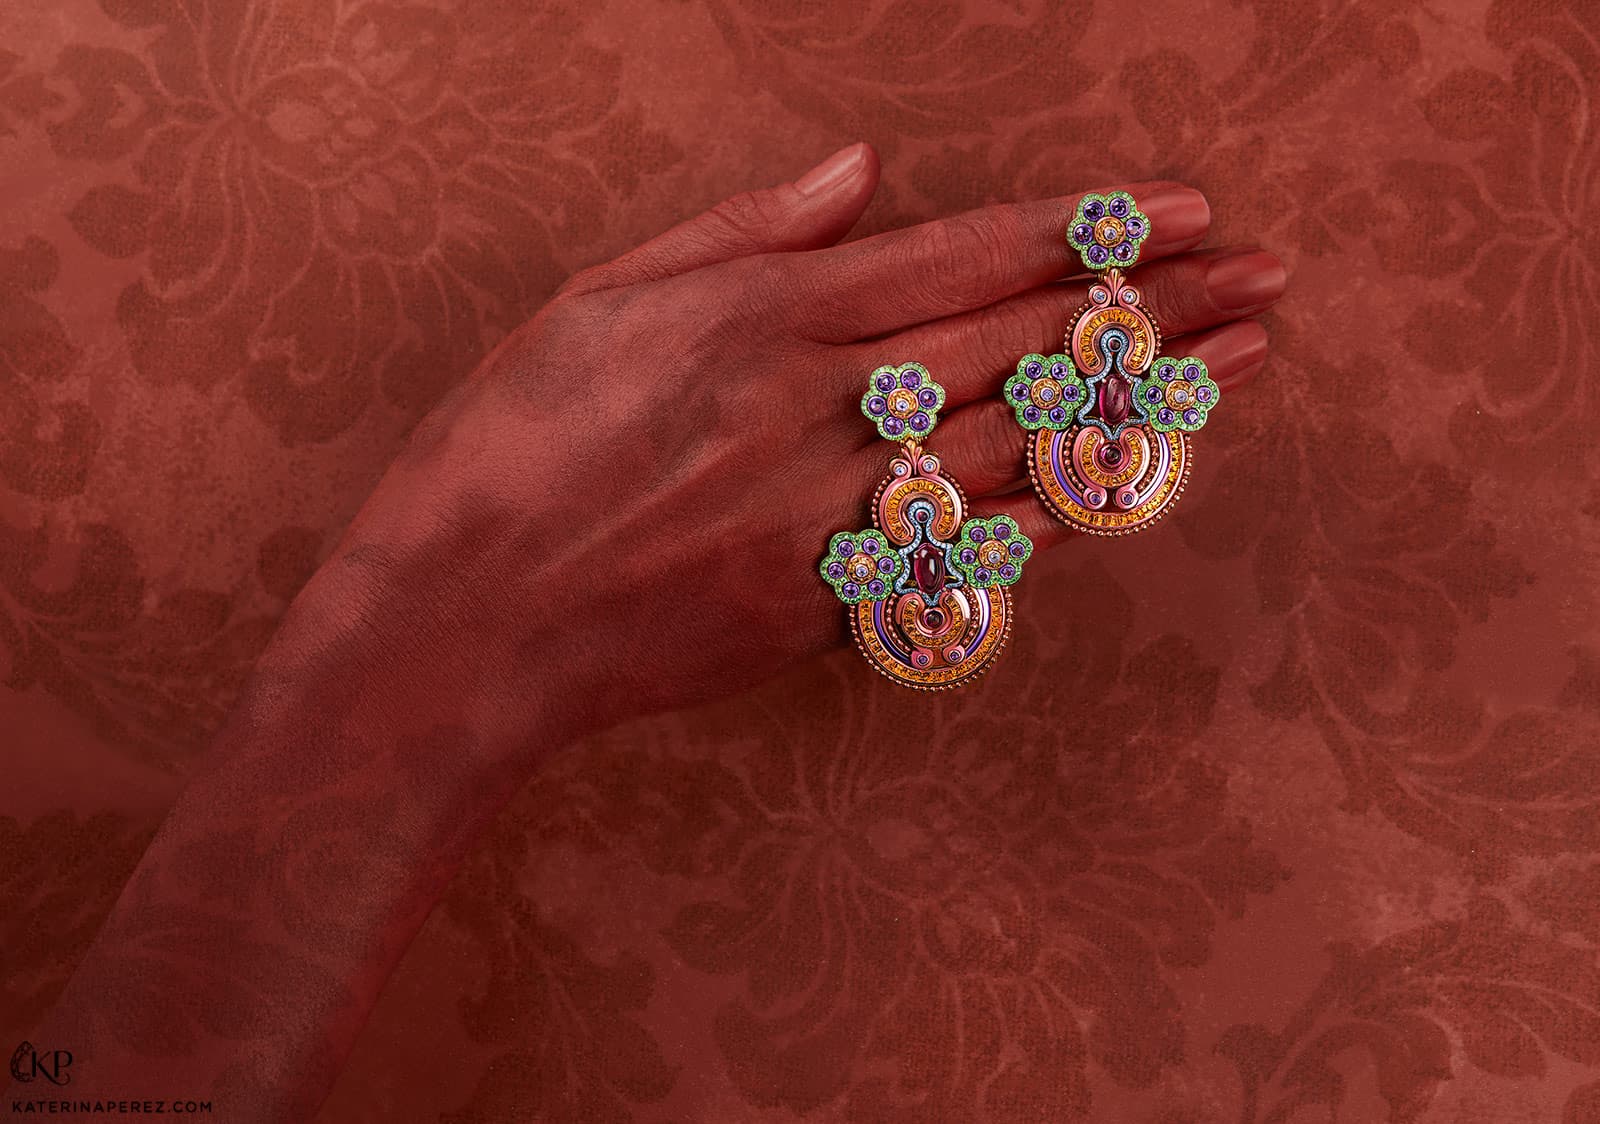 Chopard earrings from the 'Red Carpet' collection with sapphires